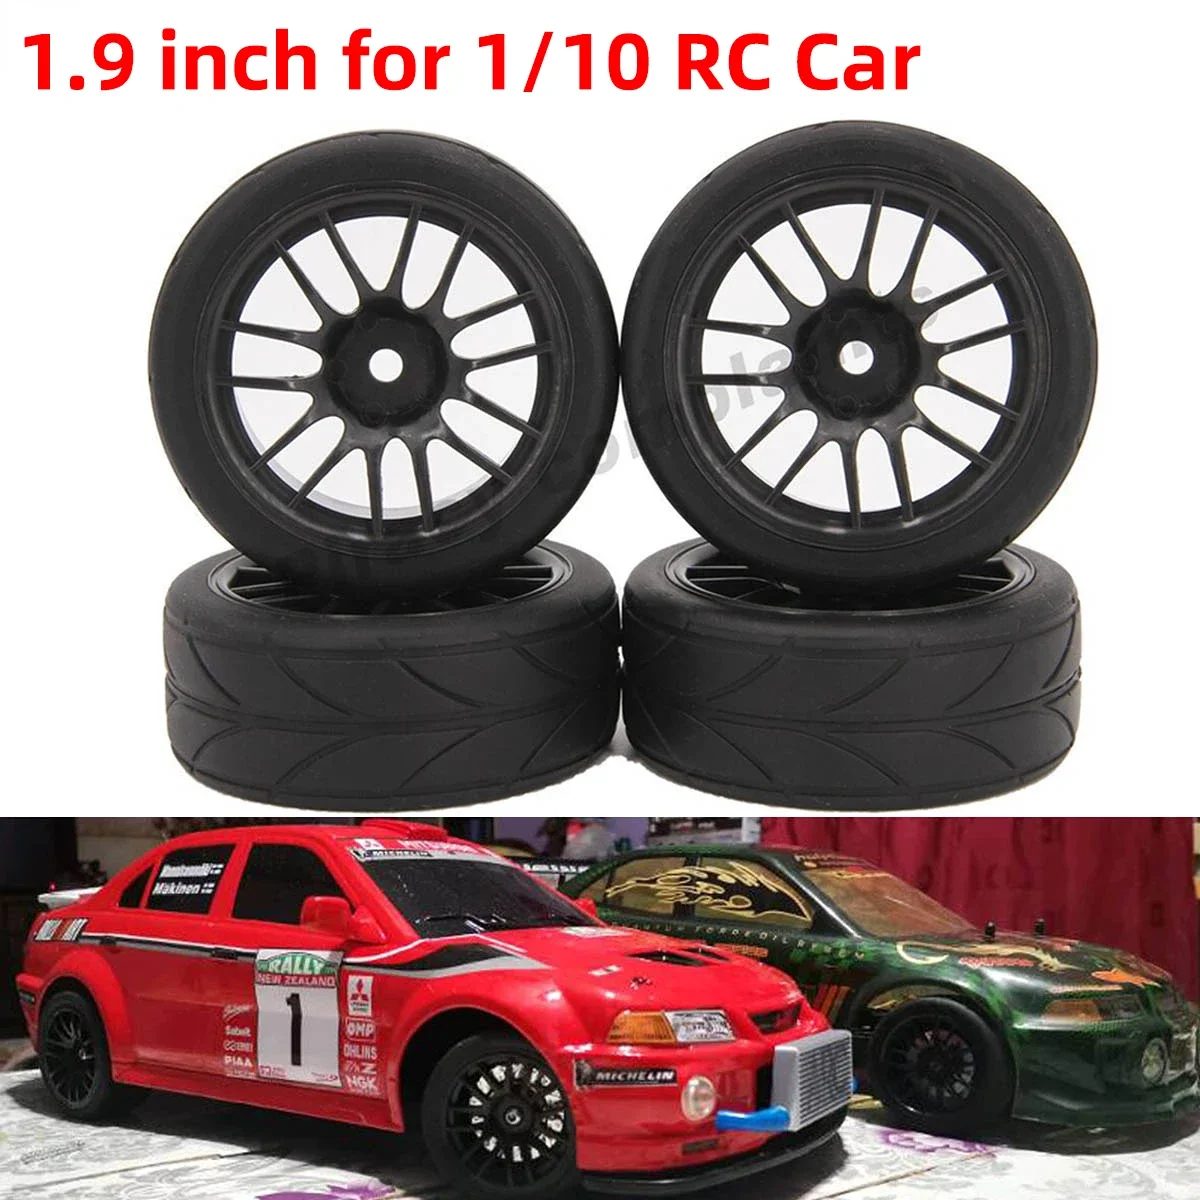 

4PCS 1.9 inch tires 65mm 1/10 On Road Tires & Wheels Rims 12mm Hex Hub for Tamiya Exceed RC Touring Car 144001 94123 94122 CS